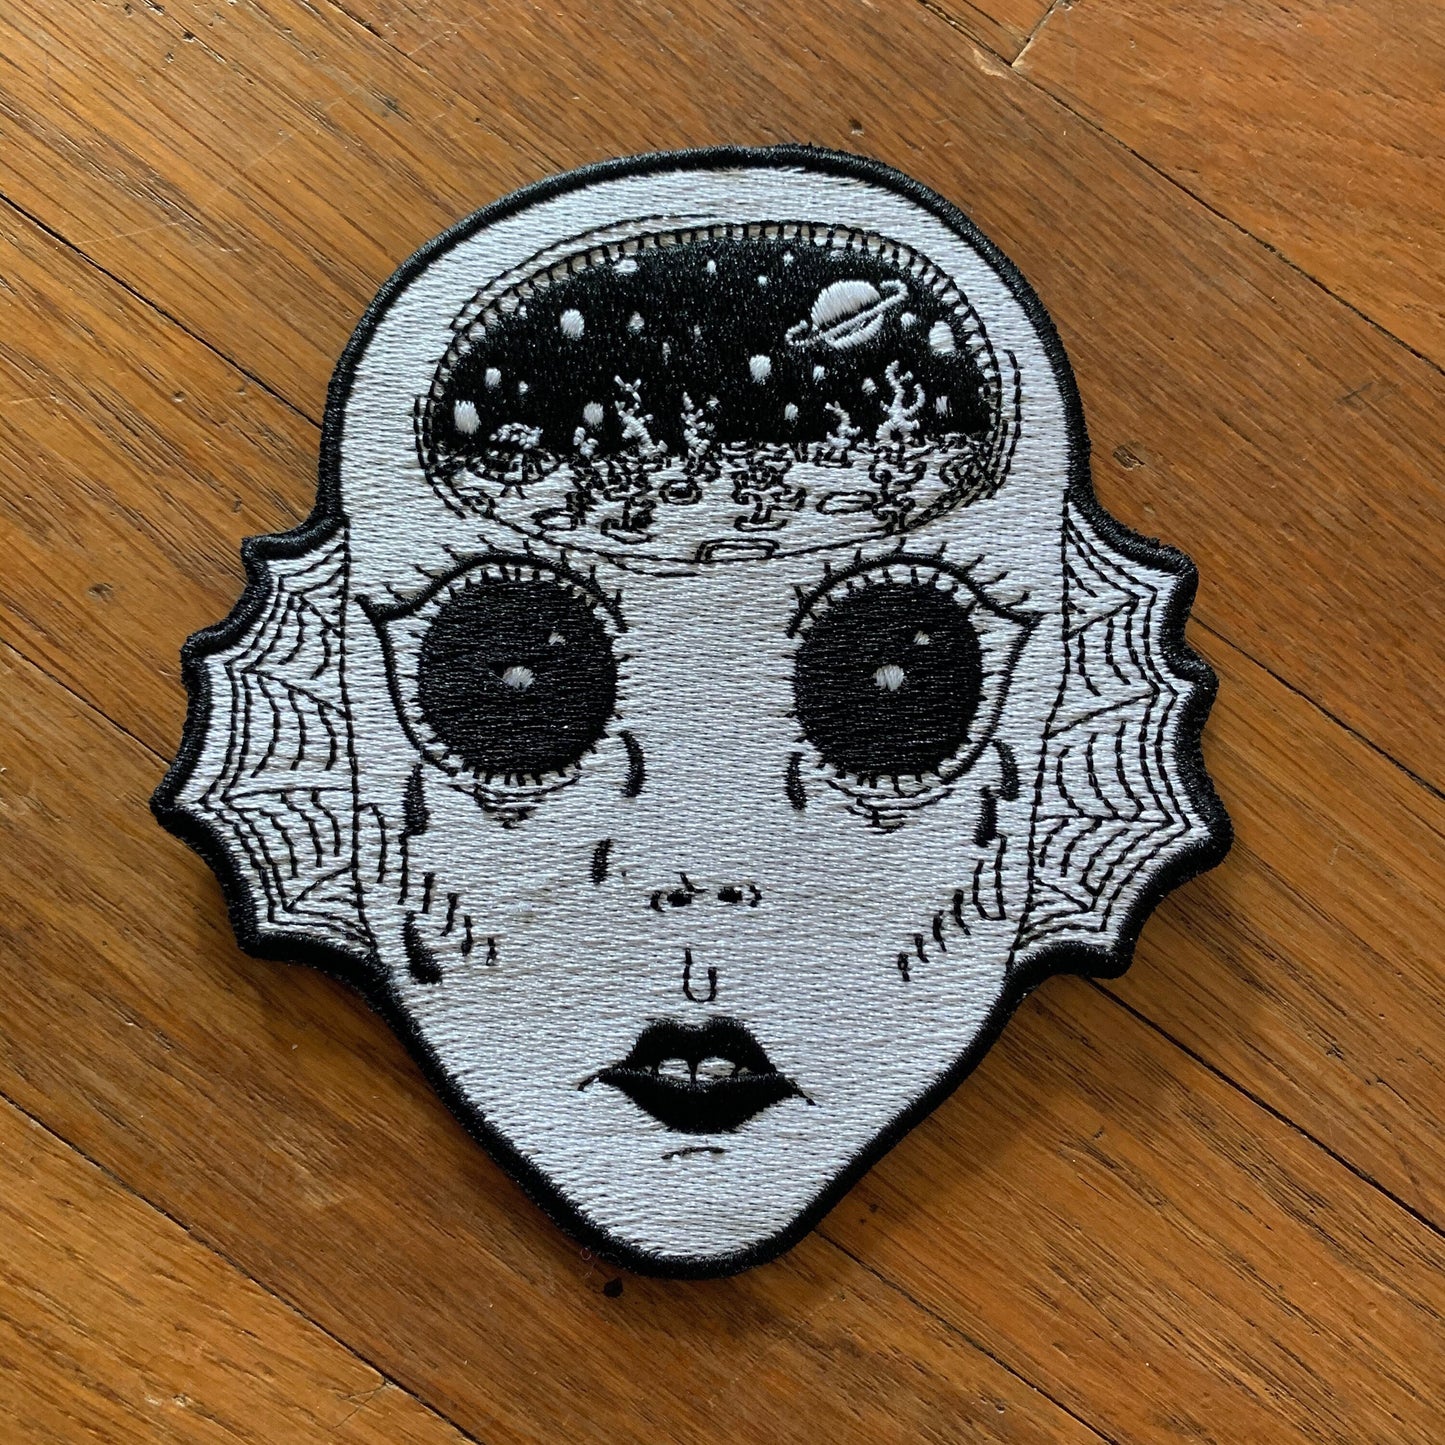 Fantastic Planet embroidered patch